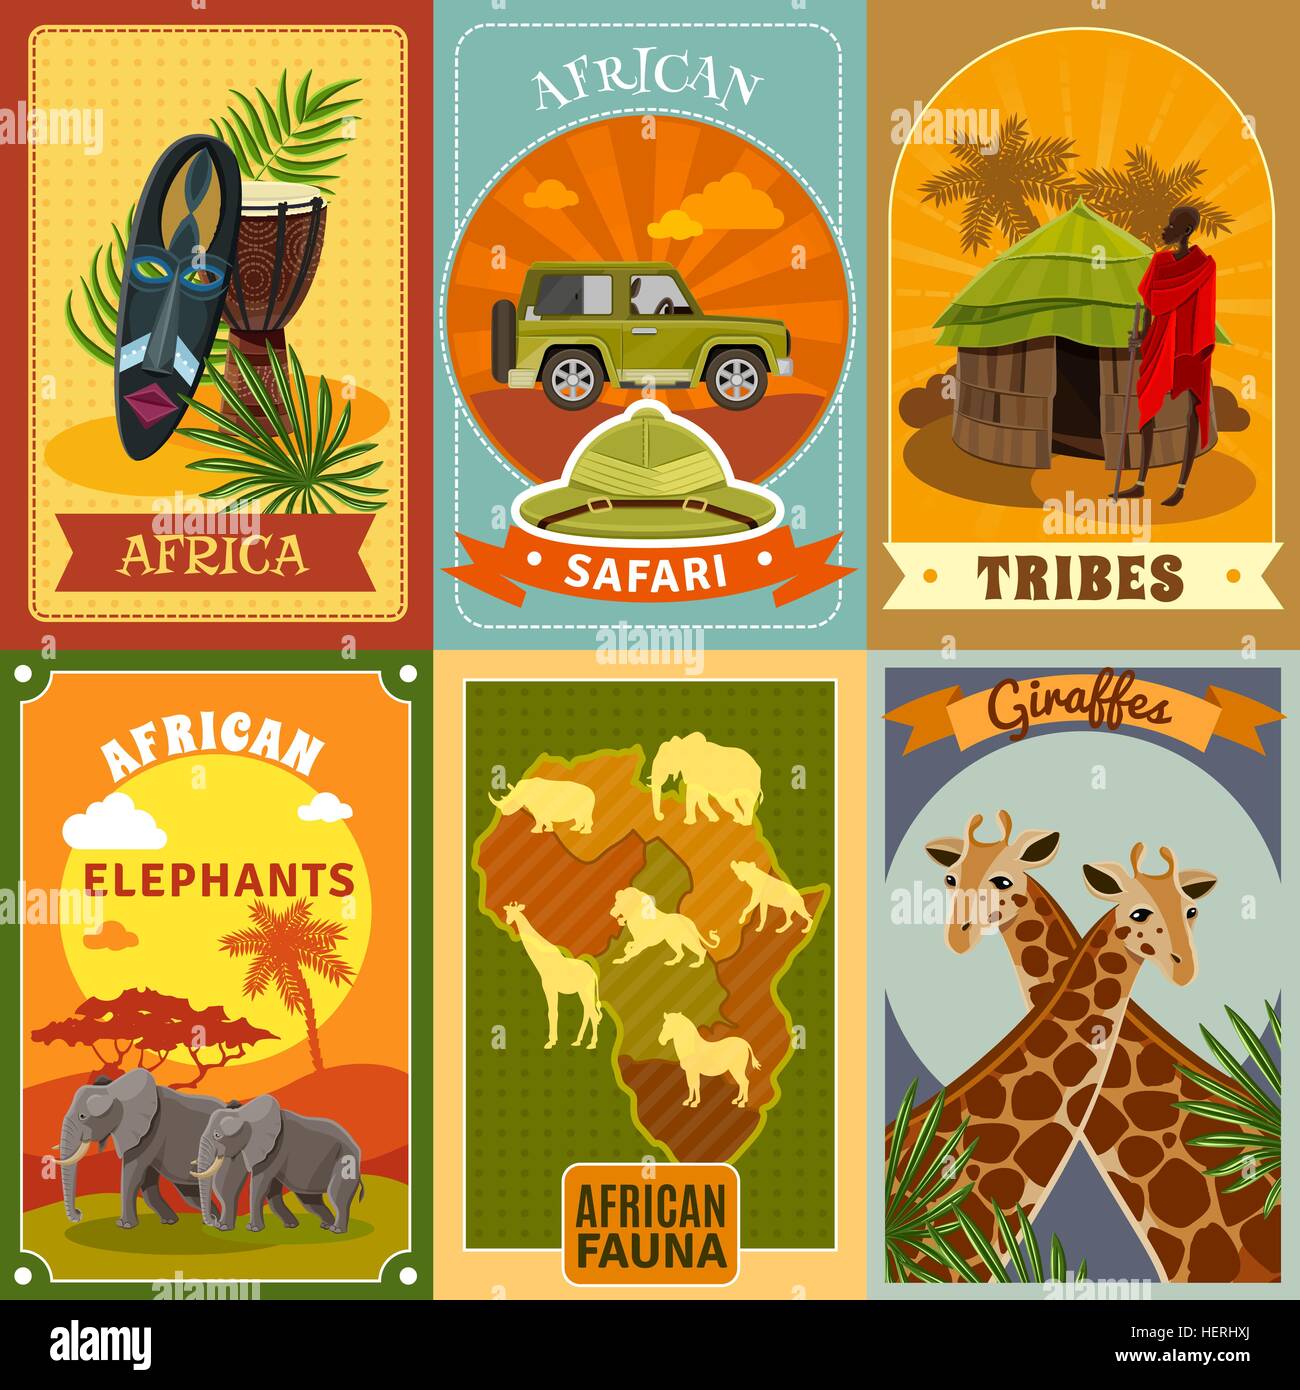 Safari Posters Set.  African safari cartoon posters set with tribes and fauna symbols isolated vector illustration Stock Vector